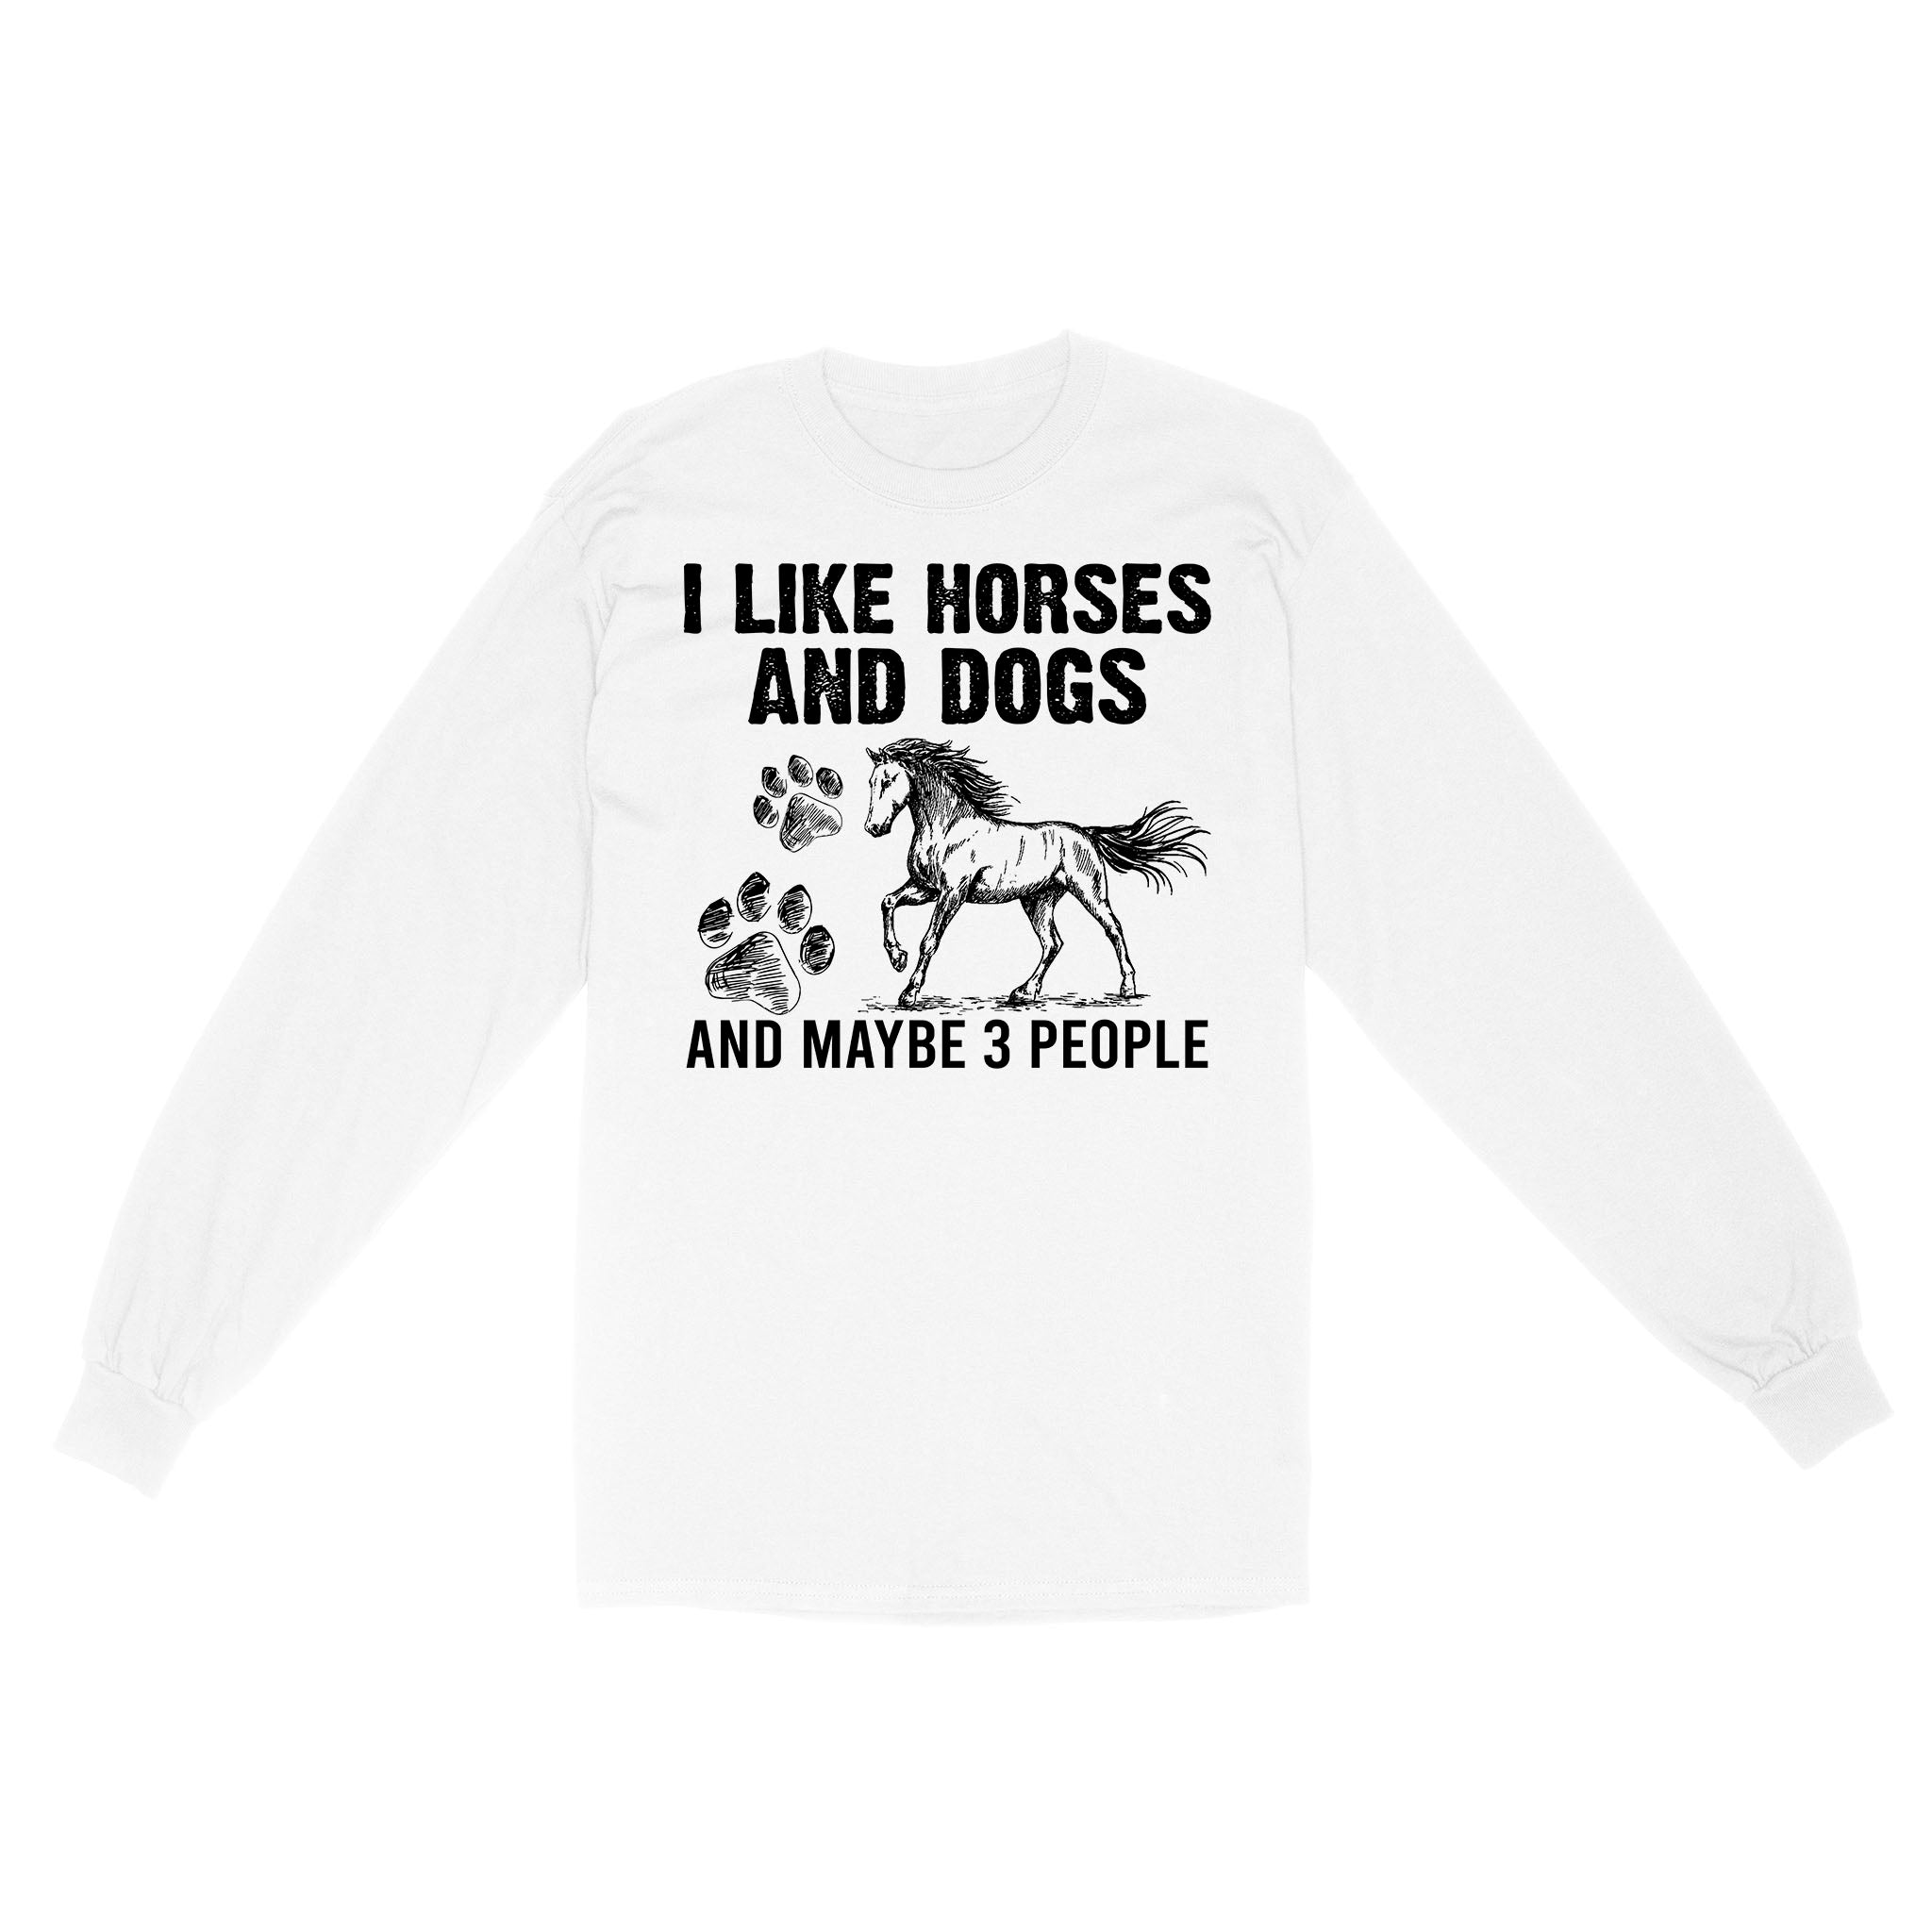 I Like Horses and Dogs and maybe 3 people, funny Horse shirt D03 NQS2710 - Standard Long Sleeve